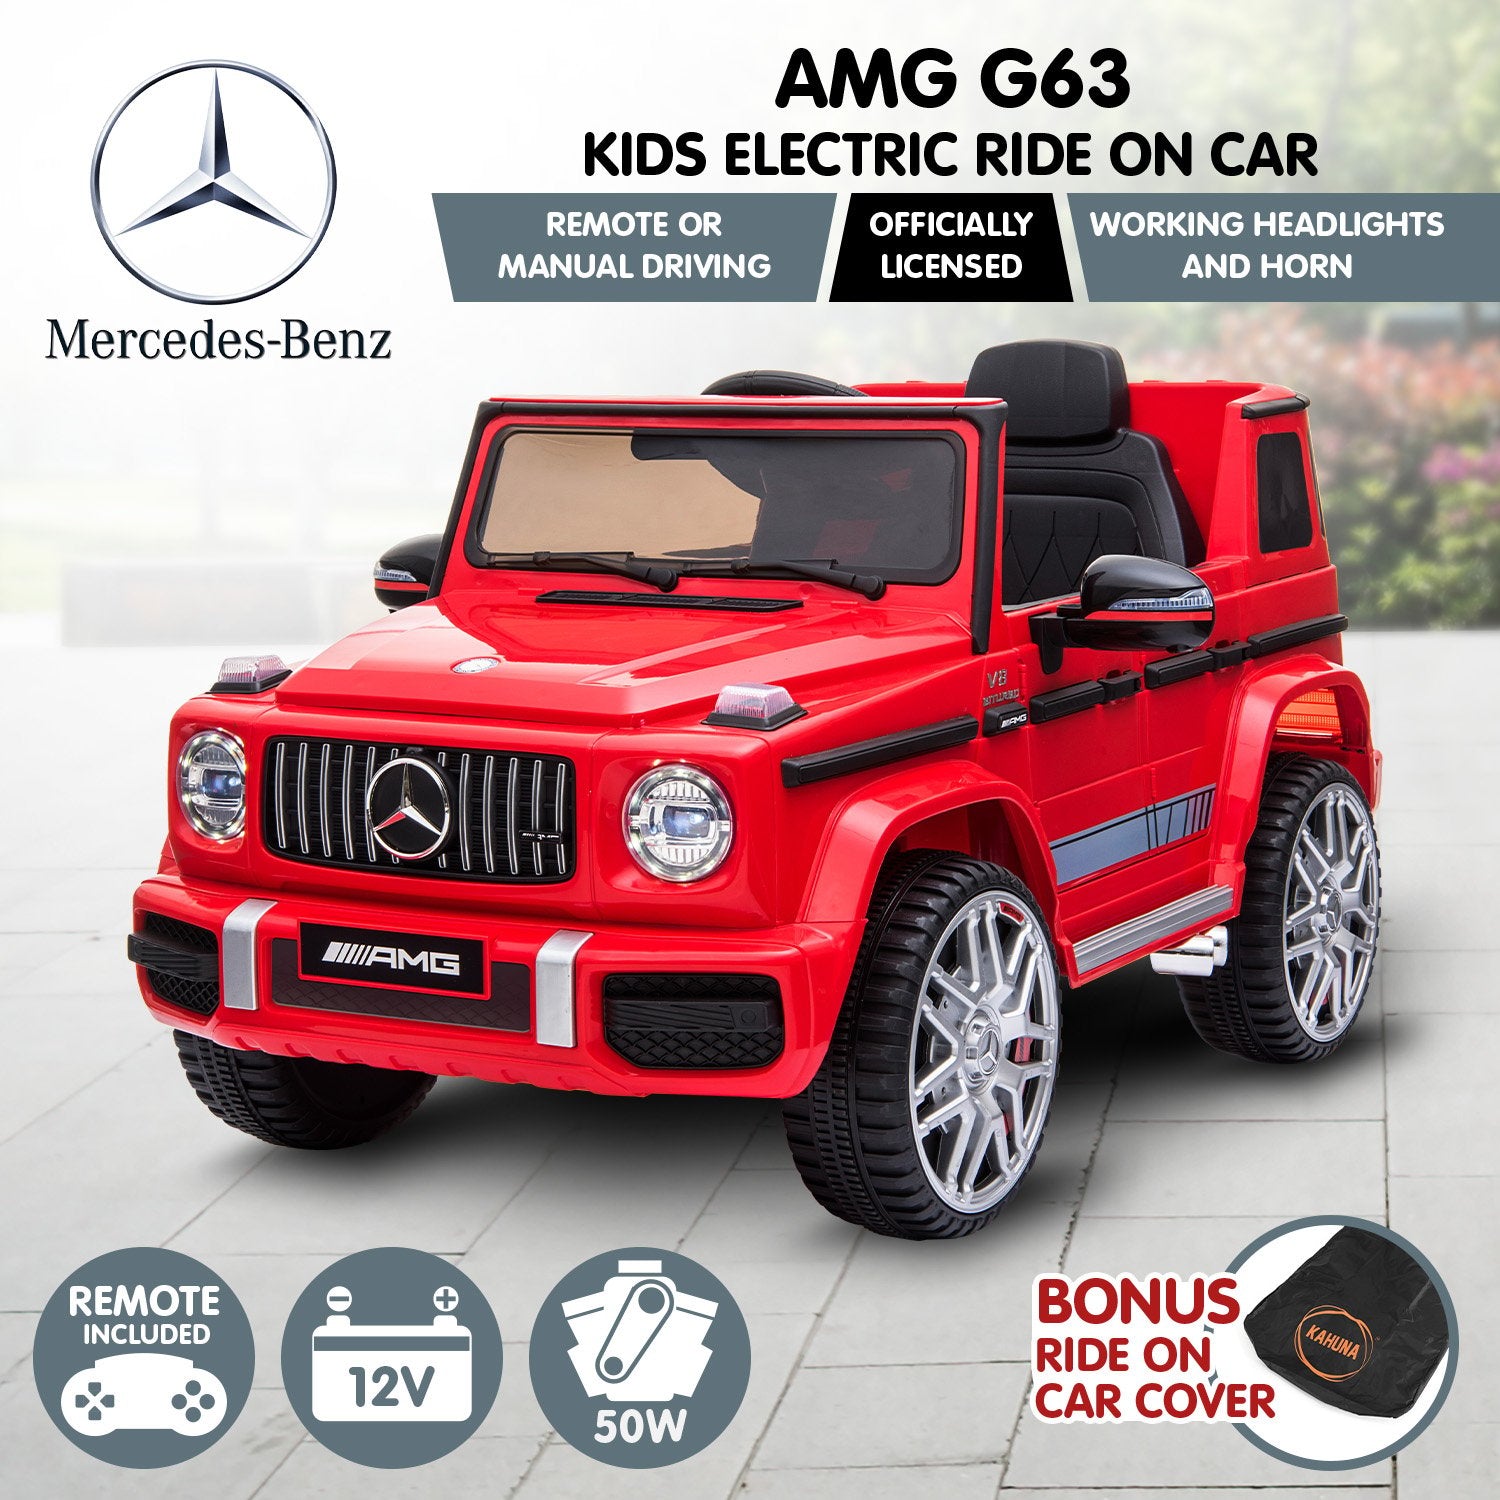 Kahuna Mercedes Benz AMG G63 Licensed Kids Ride On Electric Car Remote Control - Red